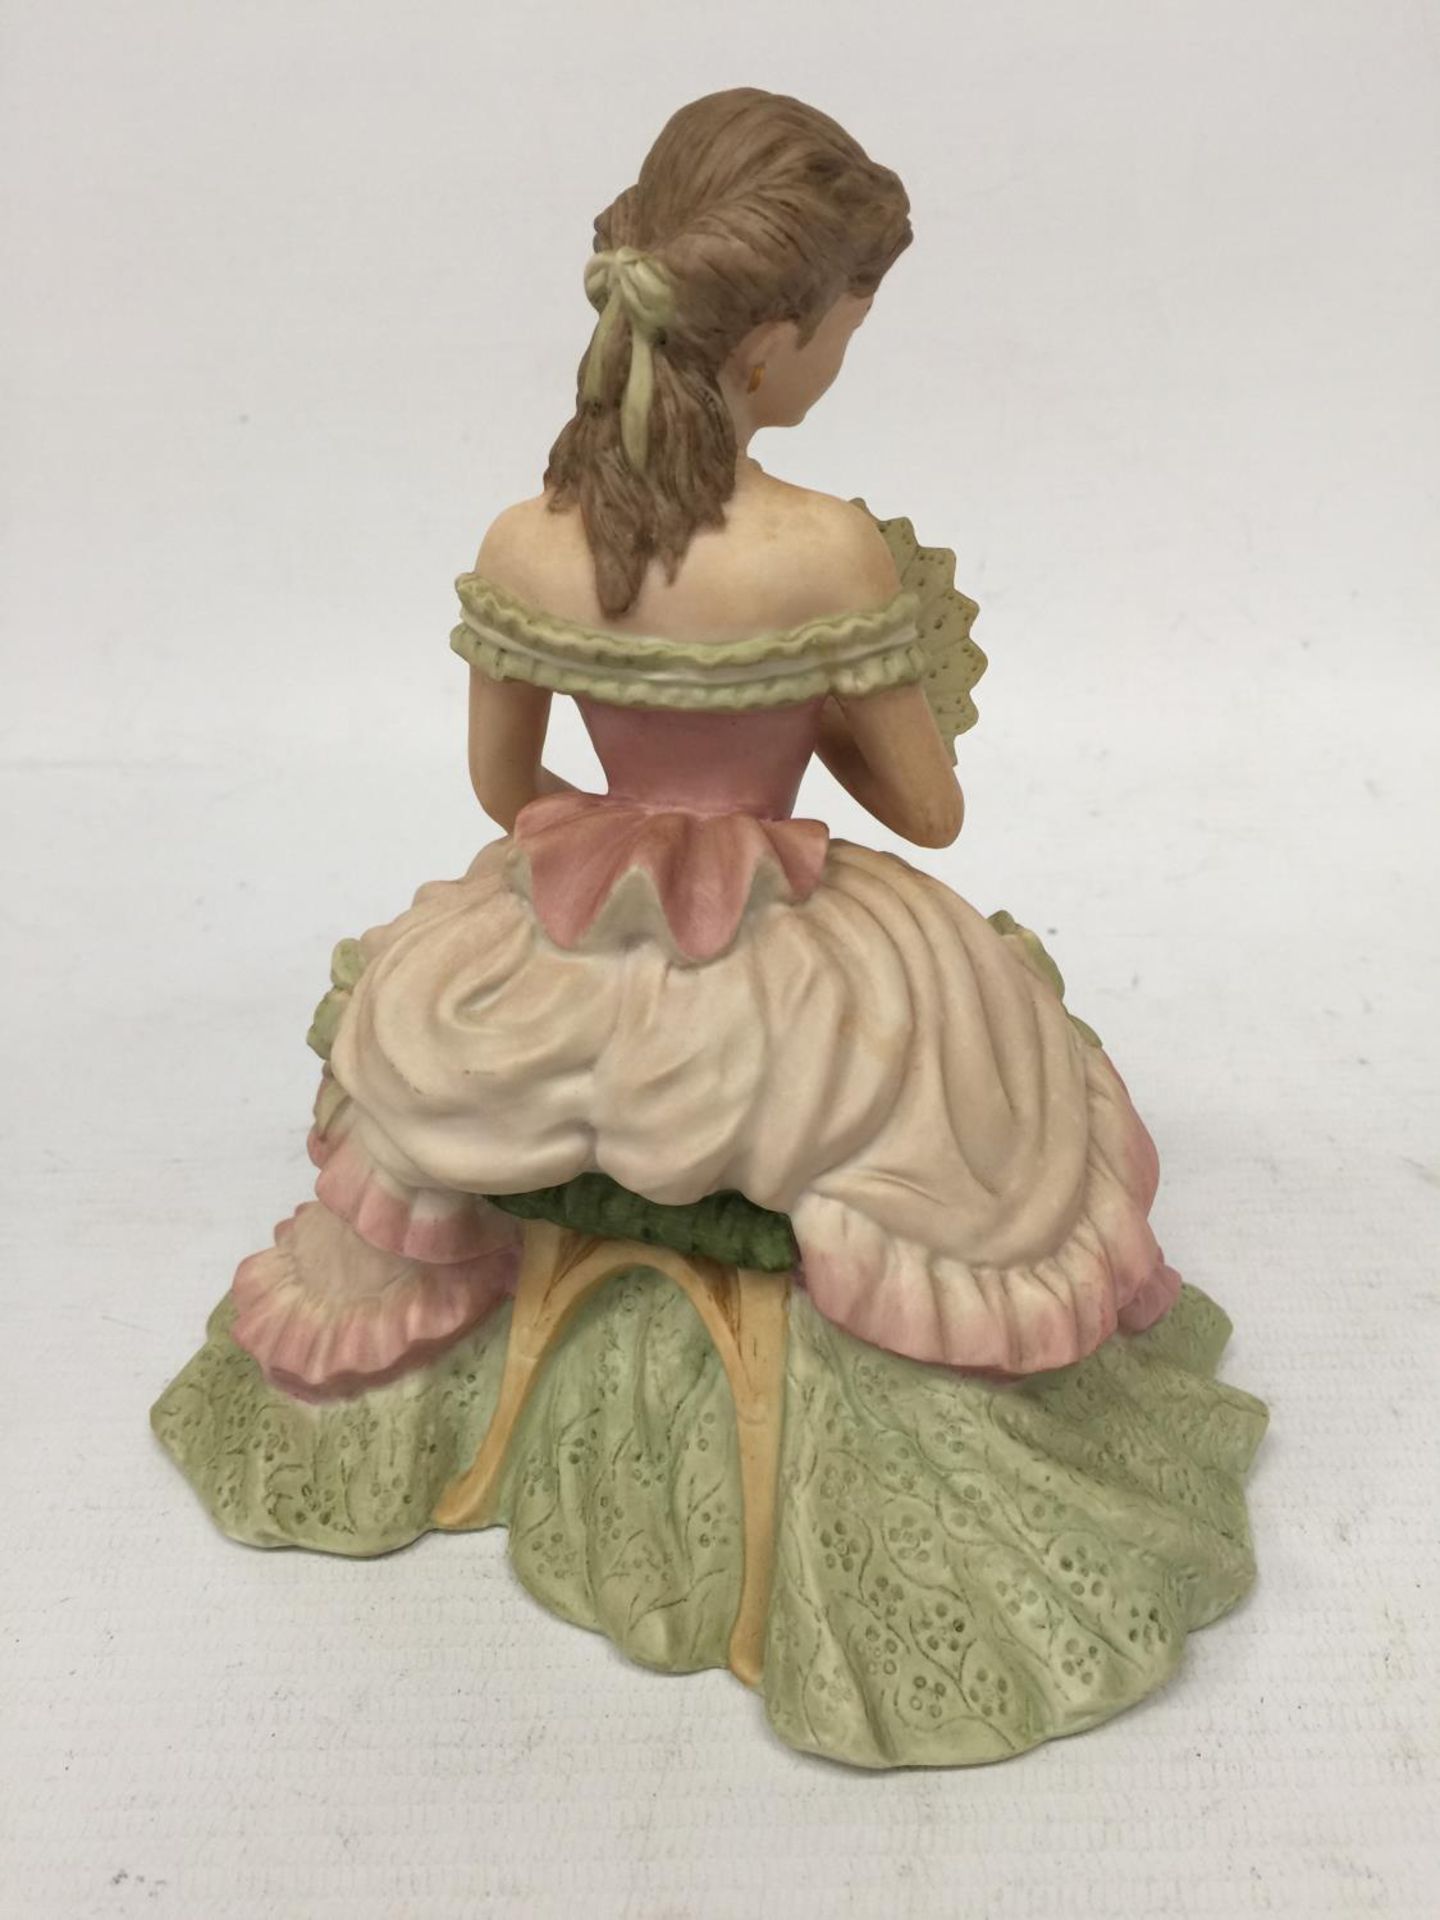 A COALPORT FIGURINE "INTERLUDE" FROM THE AGE OF ELEGANCE COLLECTION 1991 WITH A MATT FINISH - 17 CM - Image 3 of 5